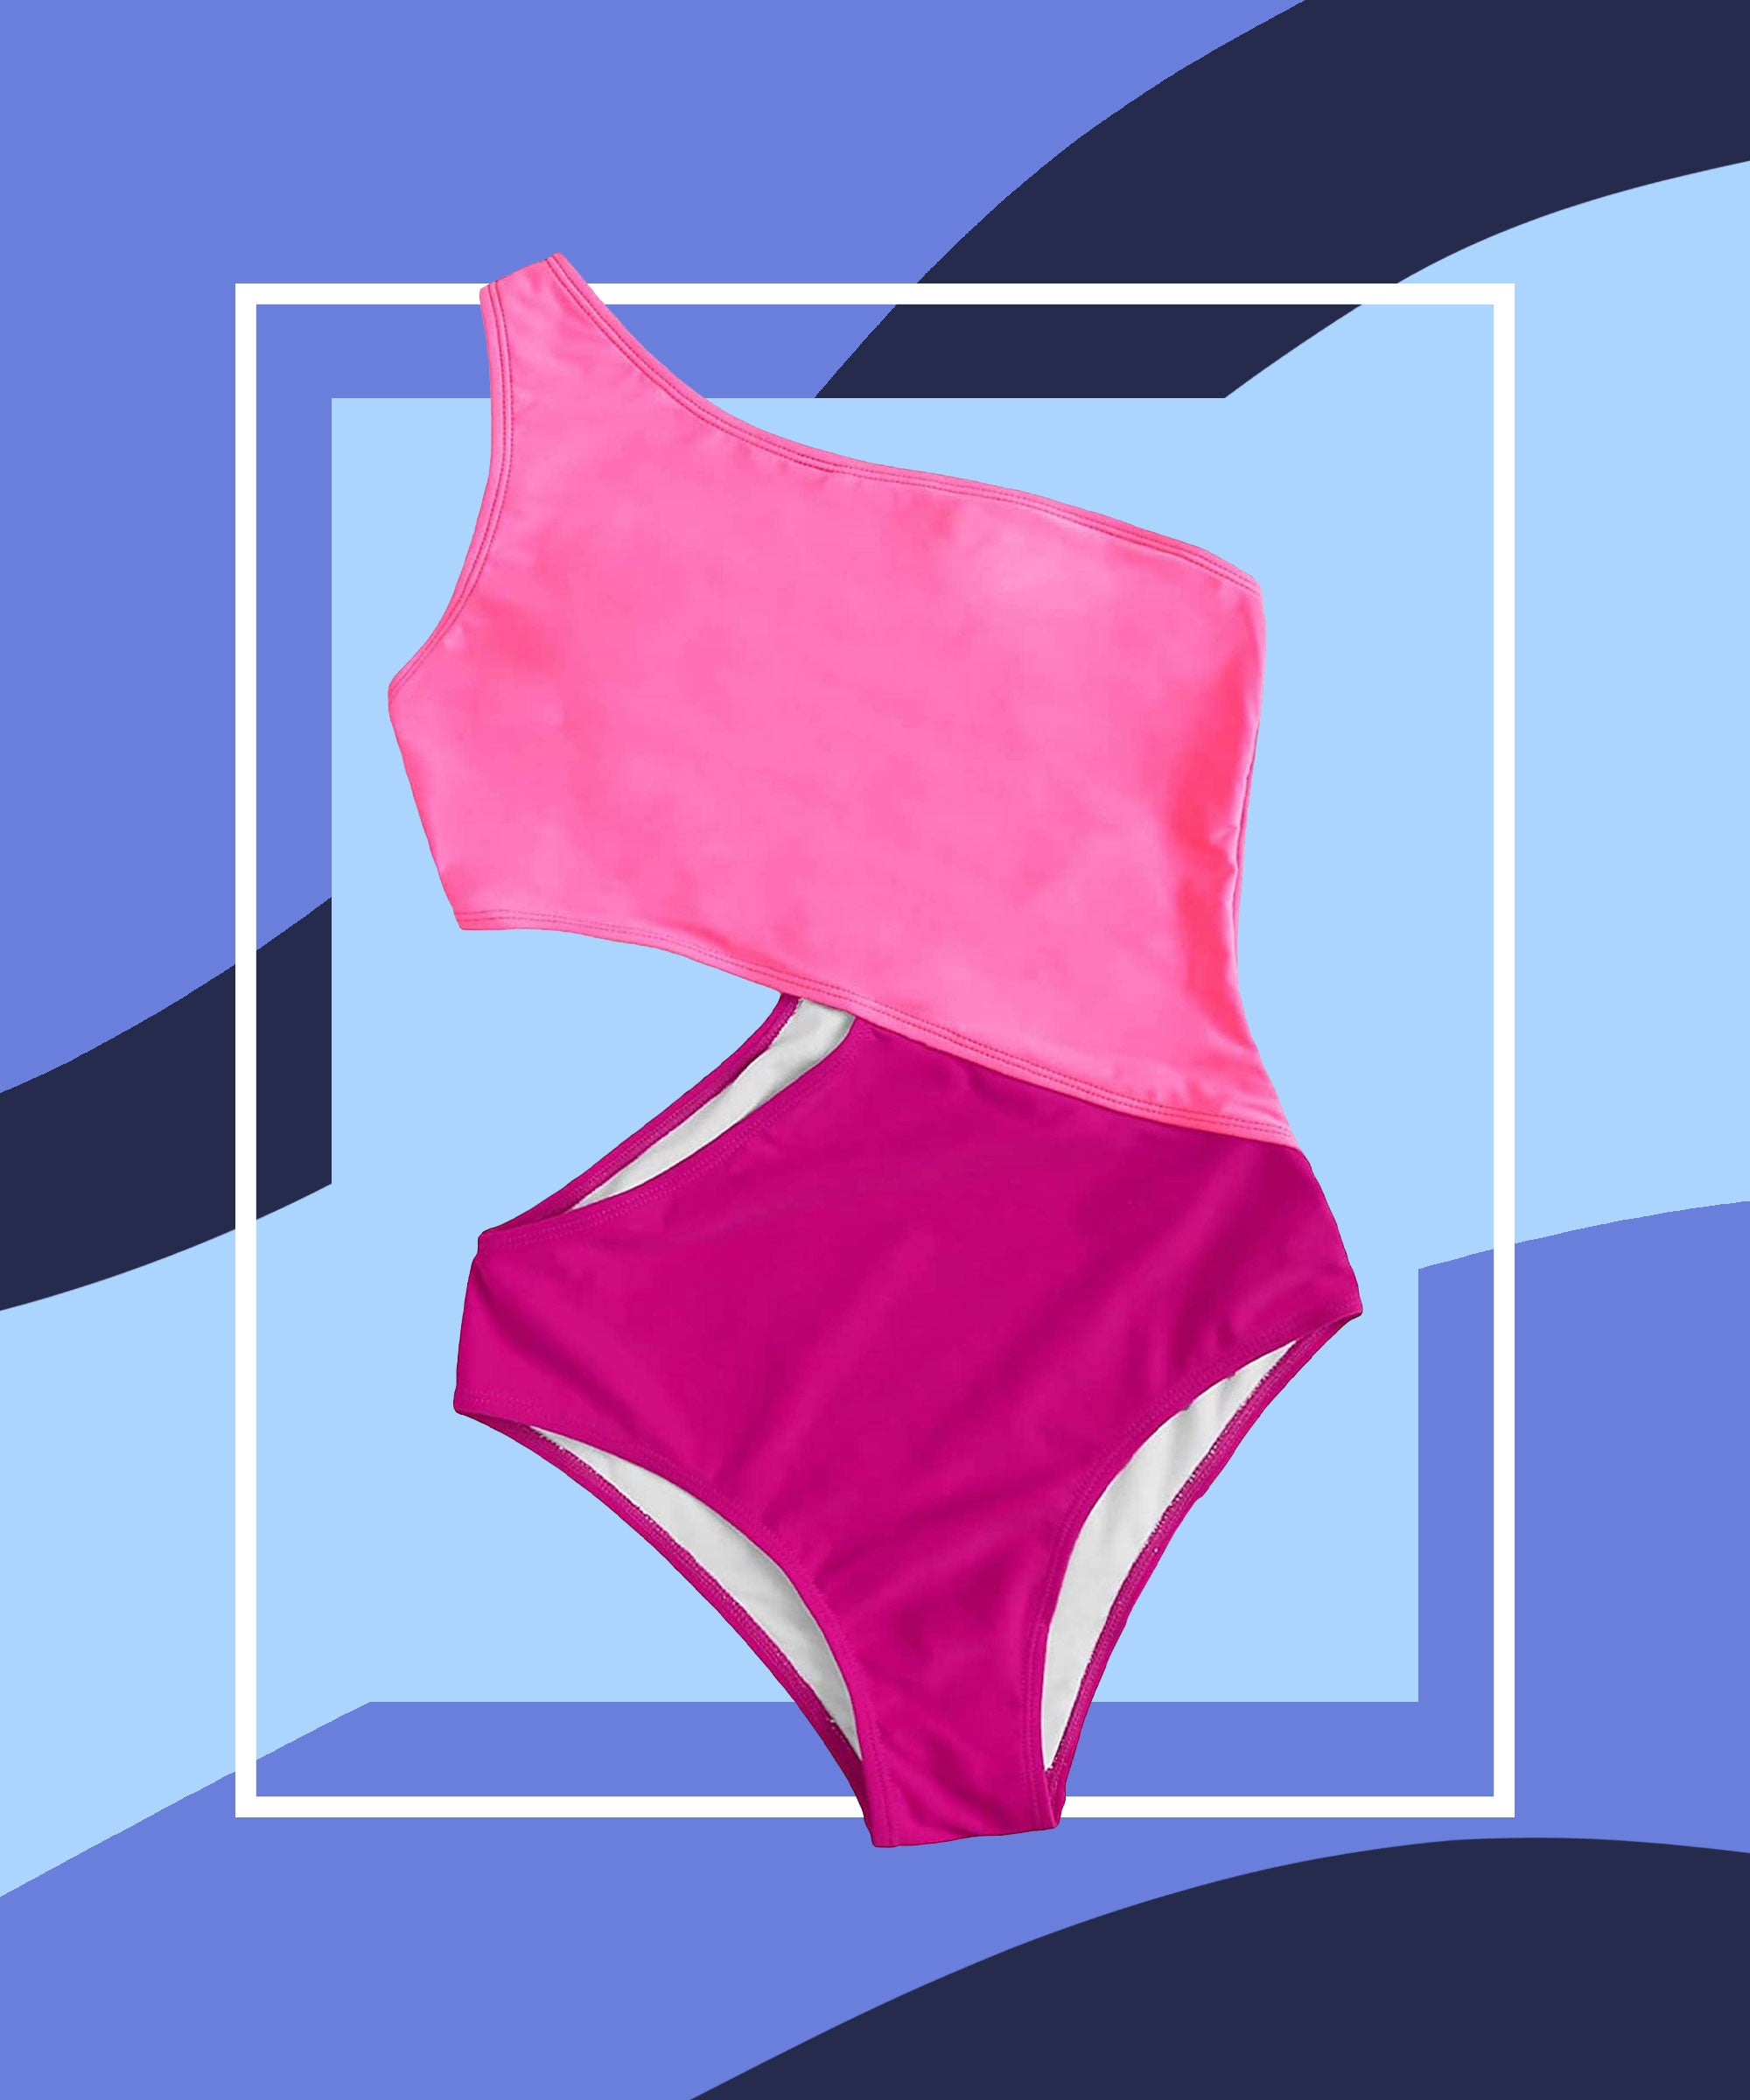 cheap swimsuits